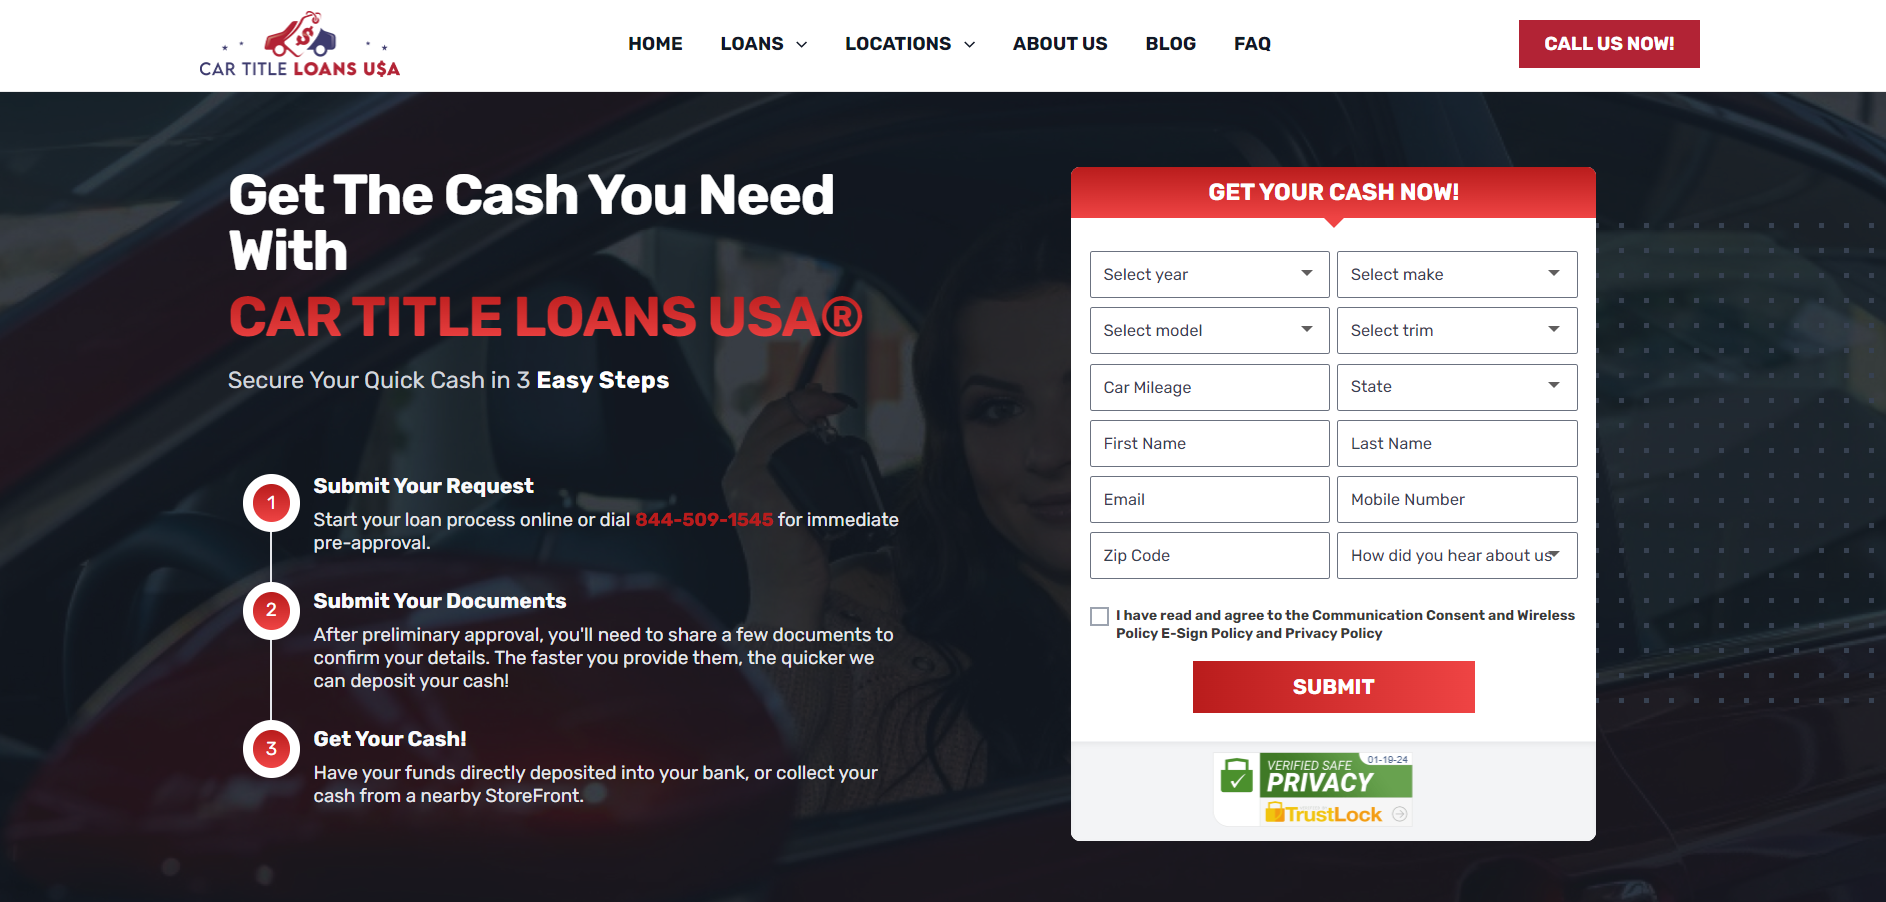 Empower Your Finances: Car Title Loans USA® Has You Covered